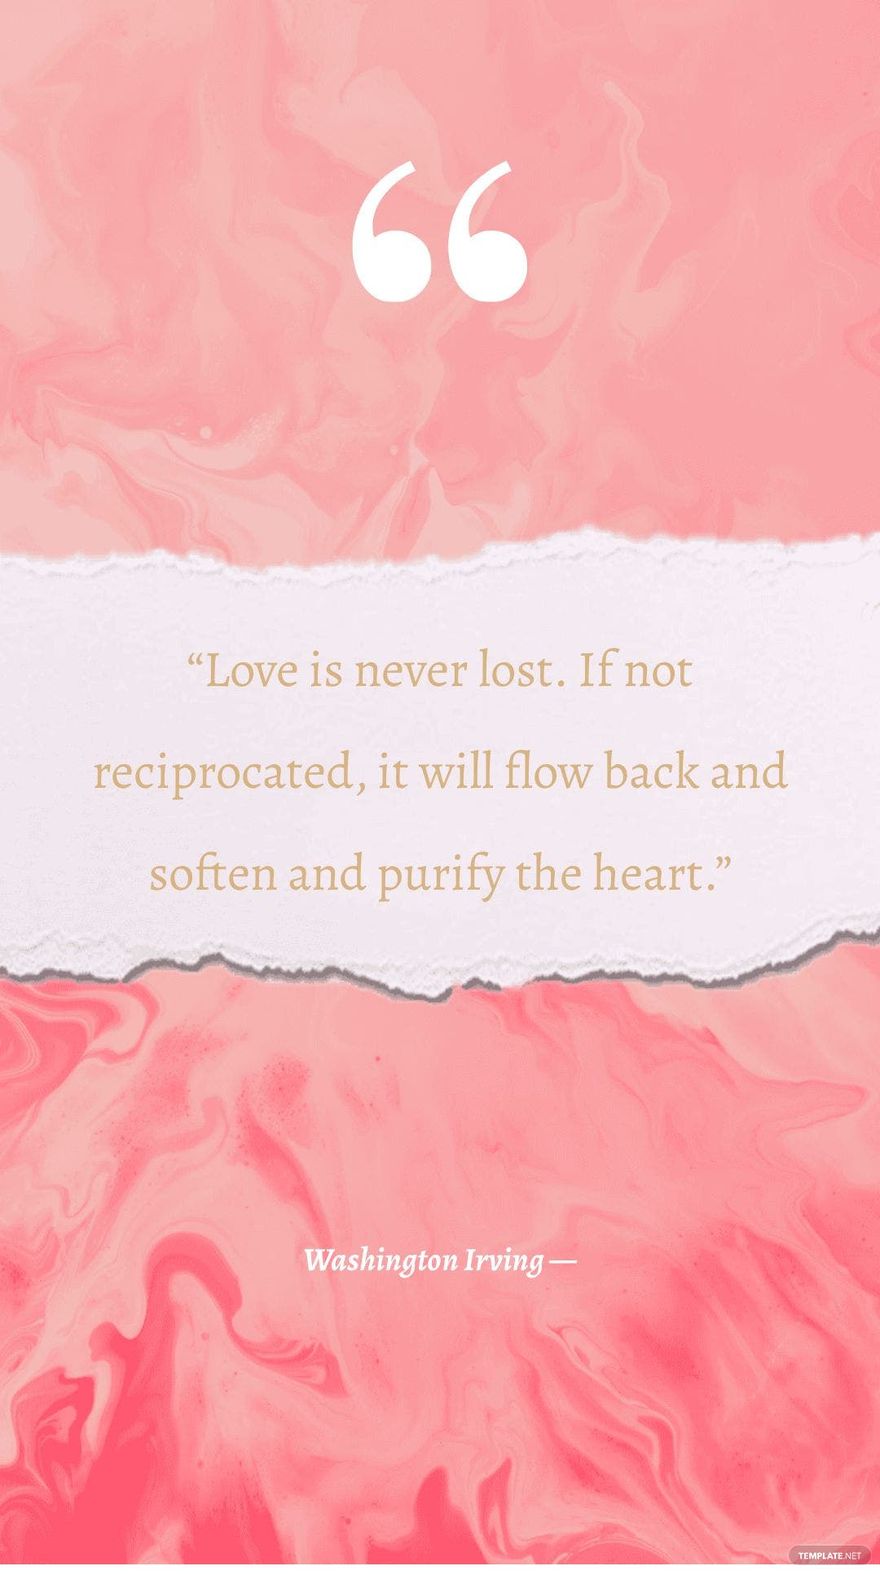 Washington Irving — “Love is never lost. If not reciprocated, it will flow back and soften and purify the heart.”